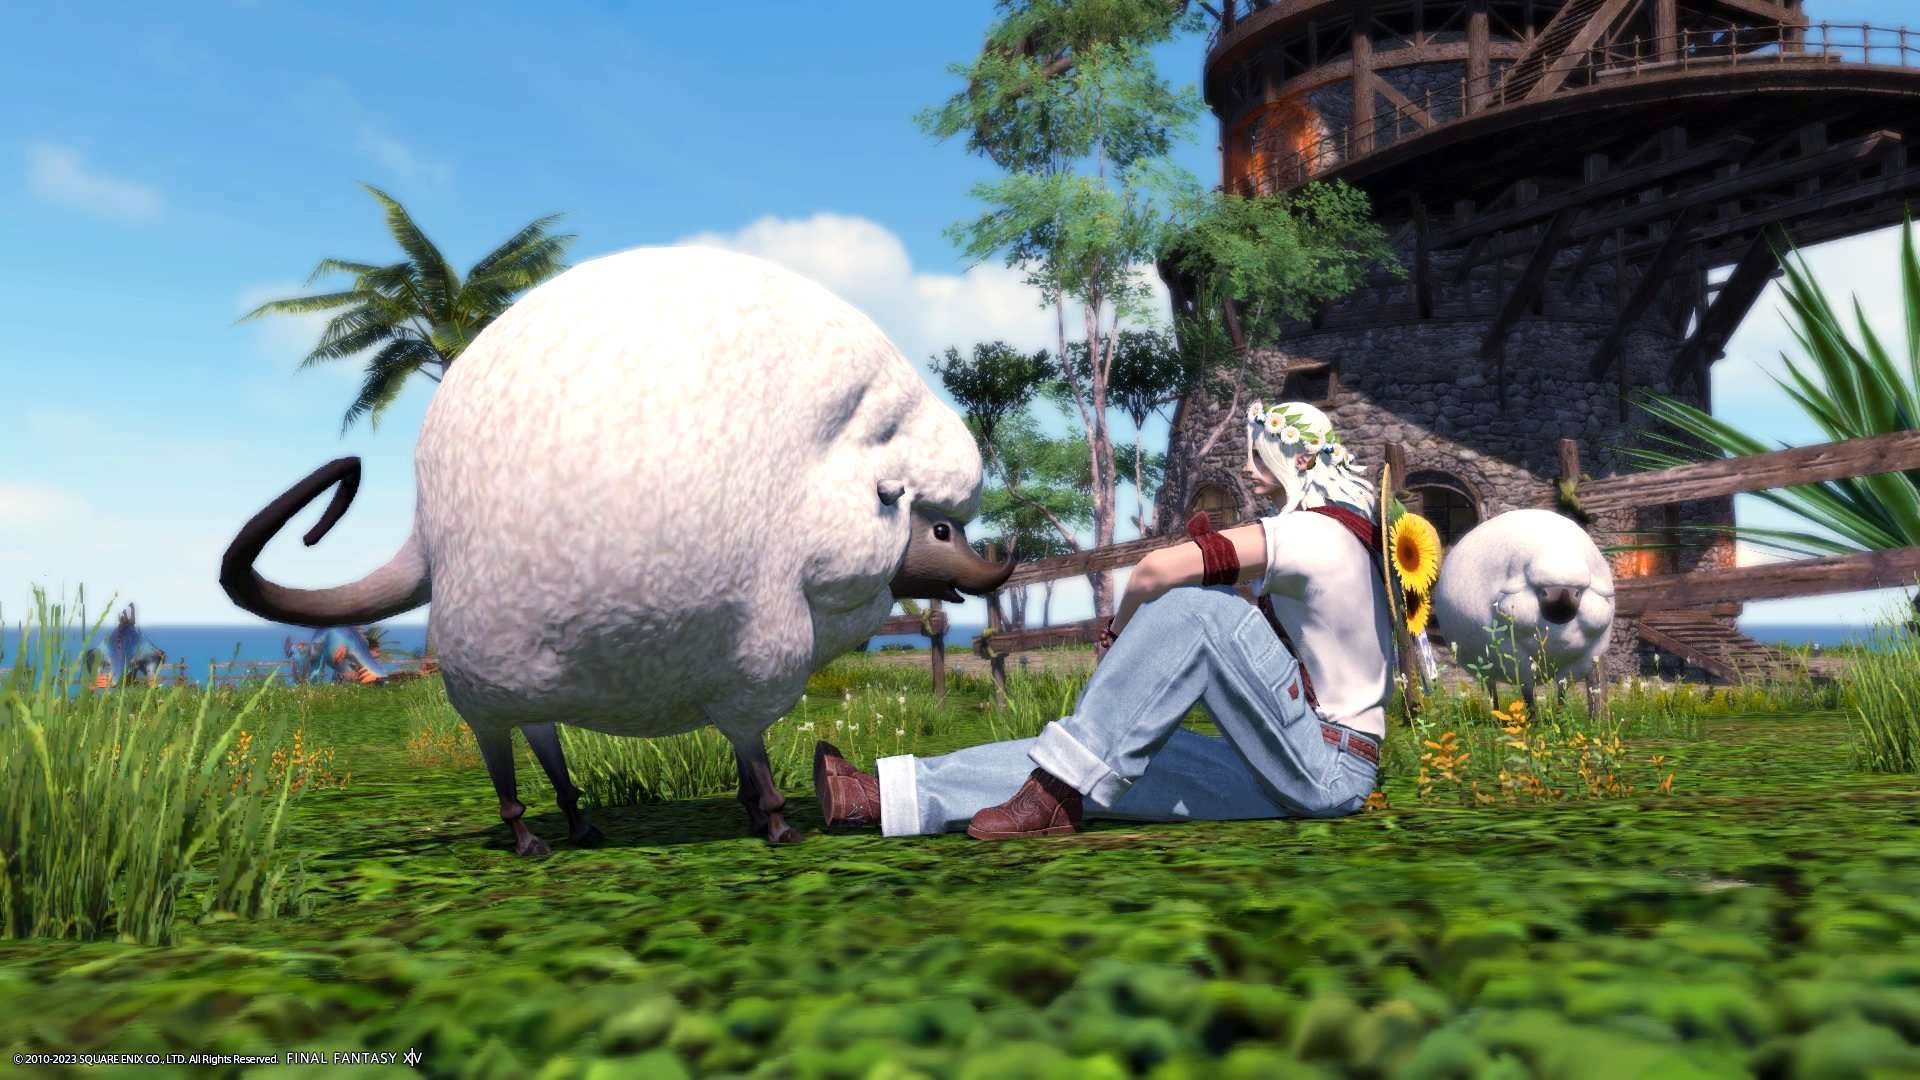 A screenshot from FFXIV. It depicts a character sitting in front of a friendly looking sheep in a field, with a tree house in the background.